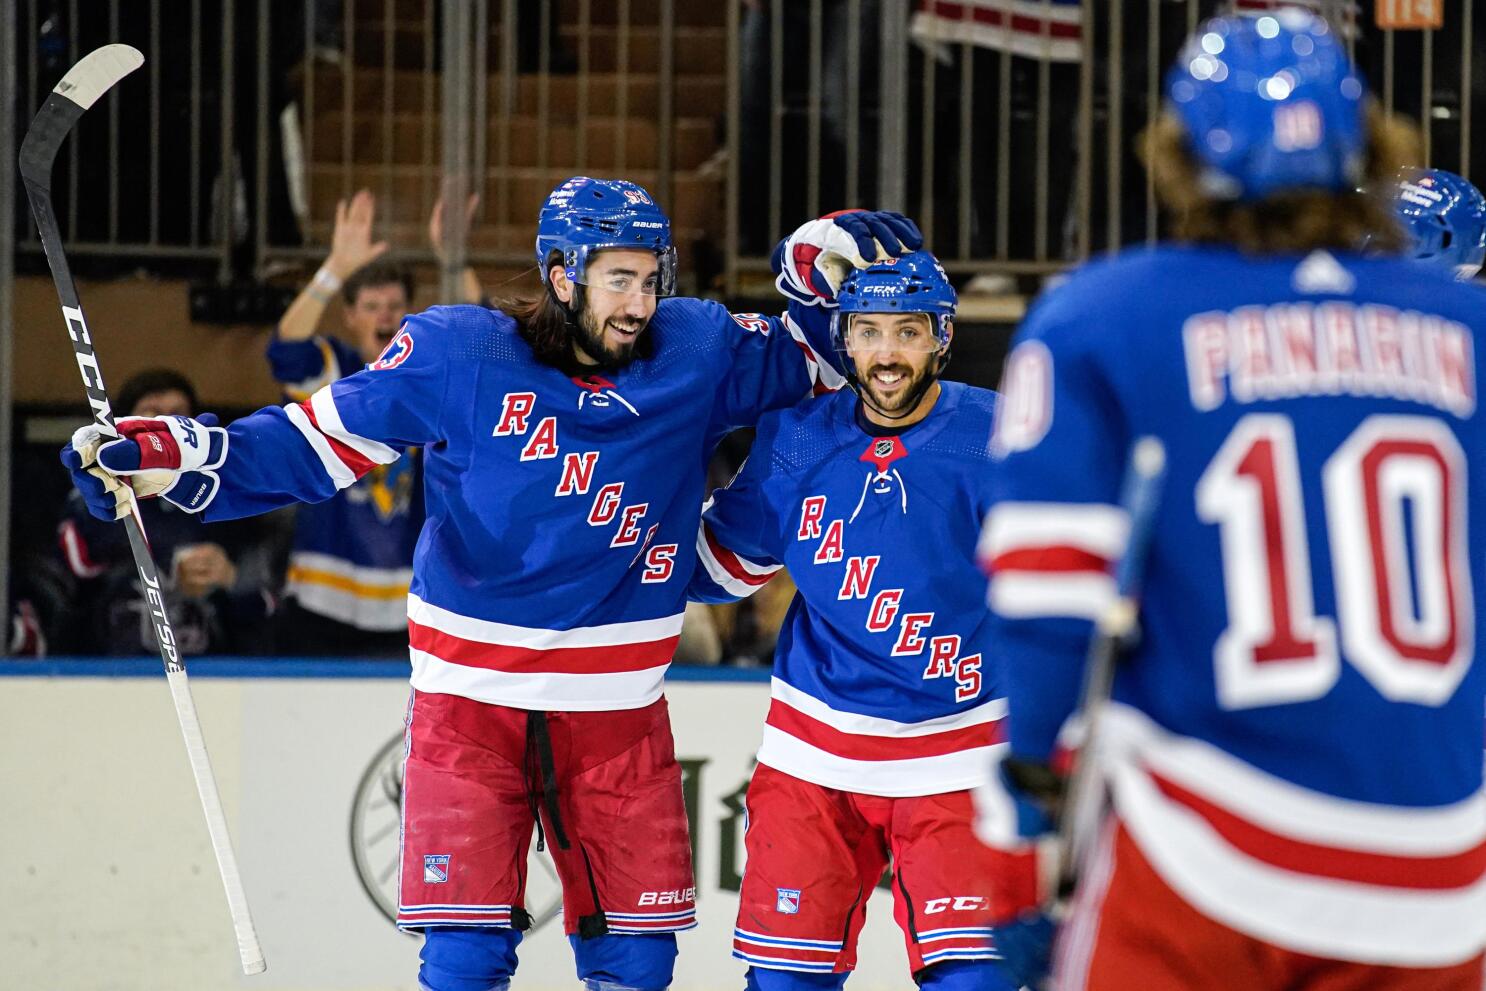 Mika Zibanejad's Game 6 goal was a big one for him and the Rangers